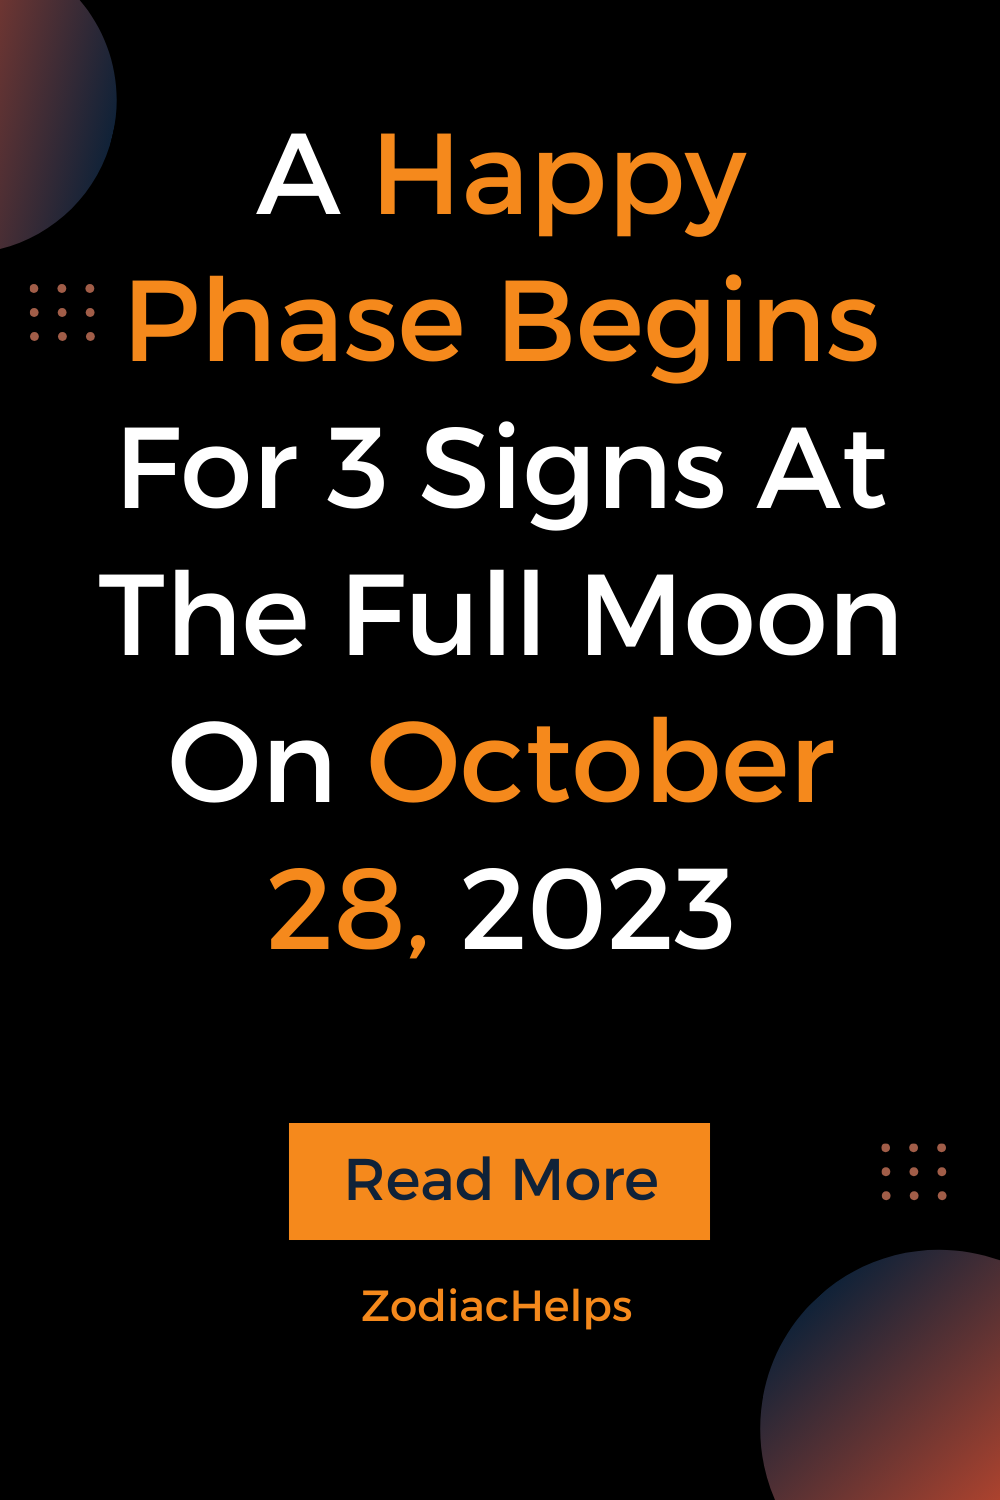 A Happy Phase Begins For 3 Signs At The Full Moon On October 28, 2023